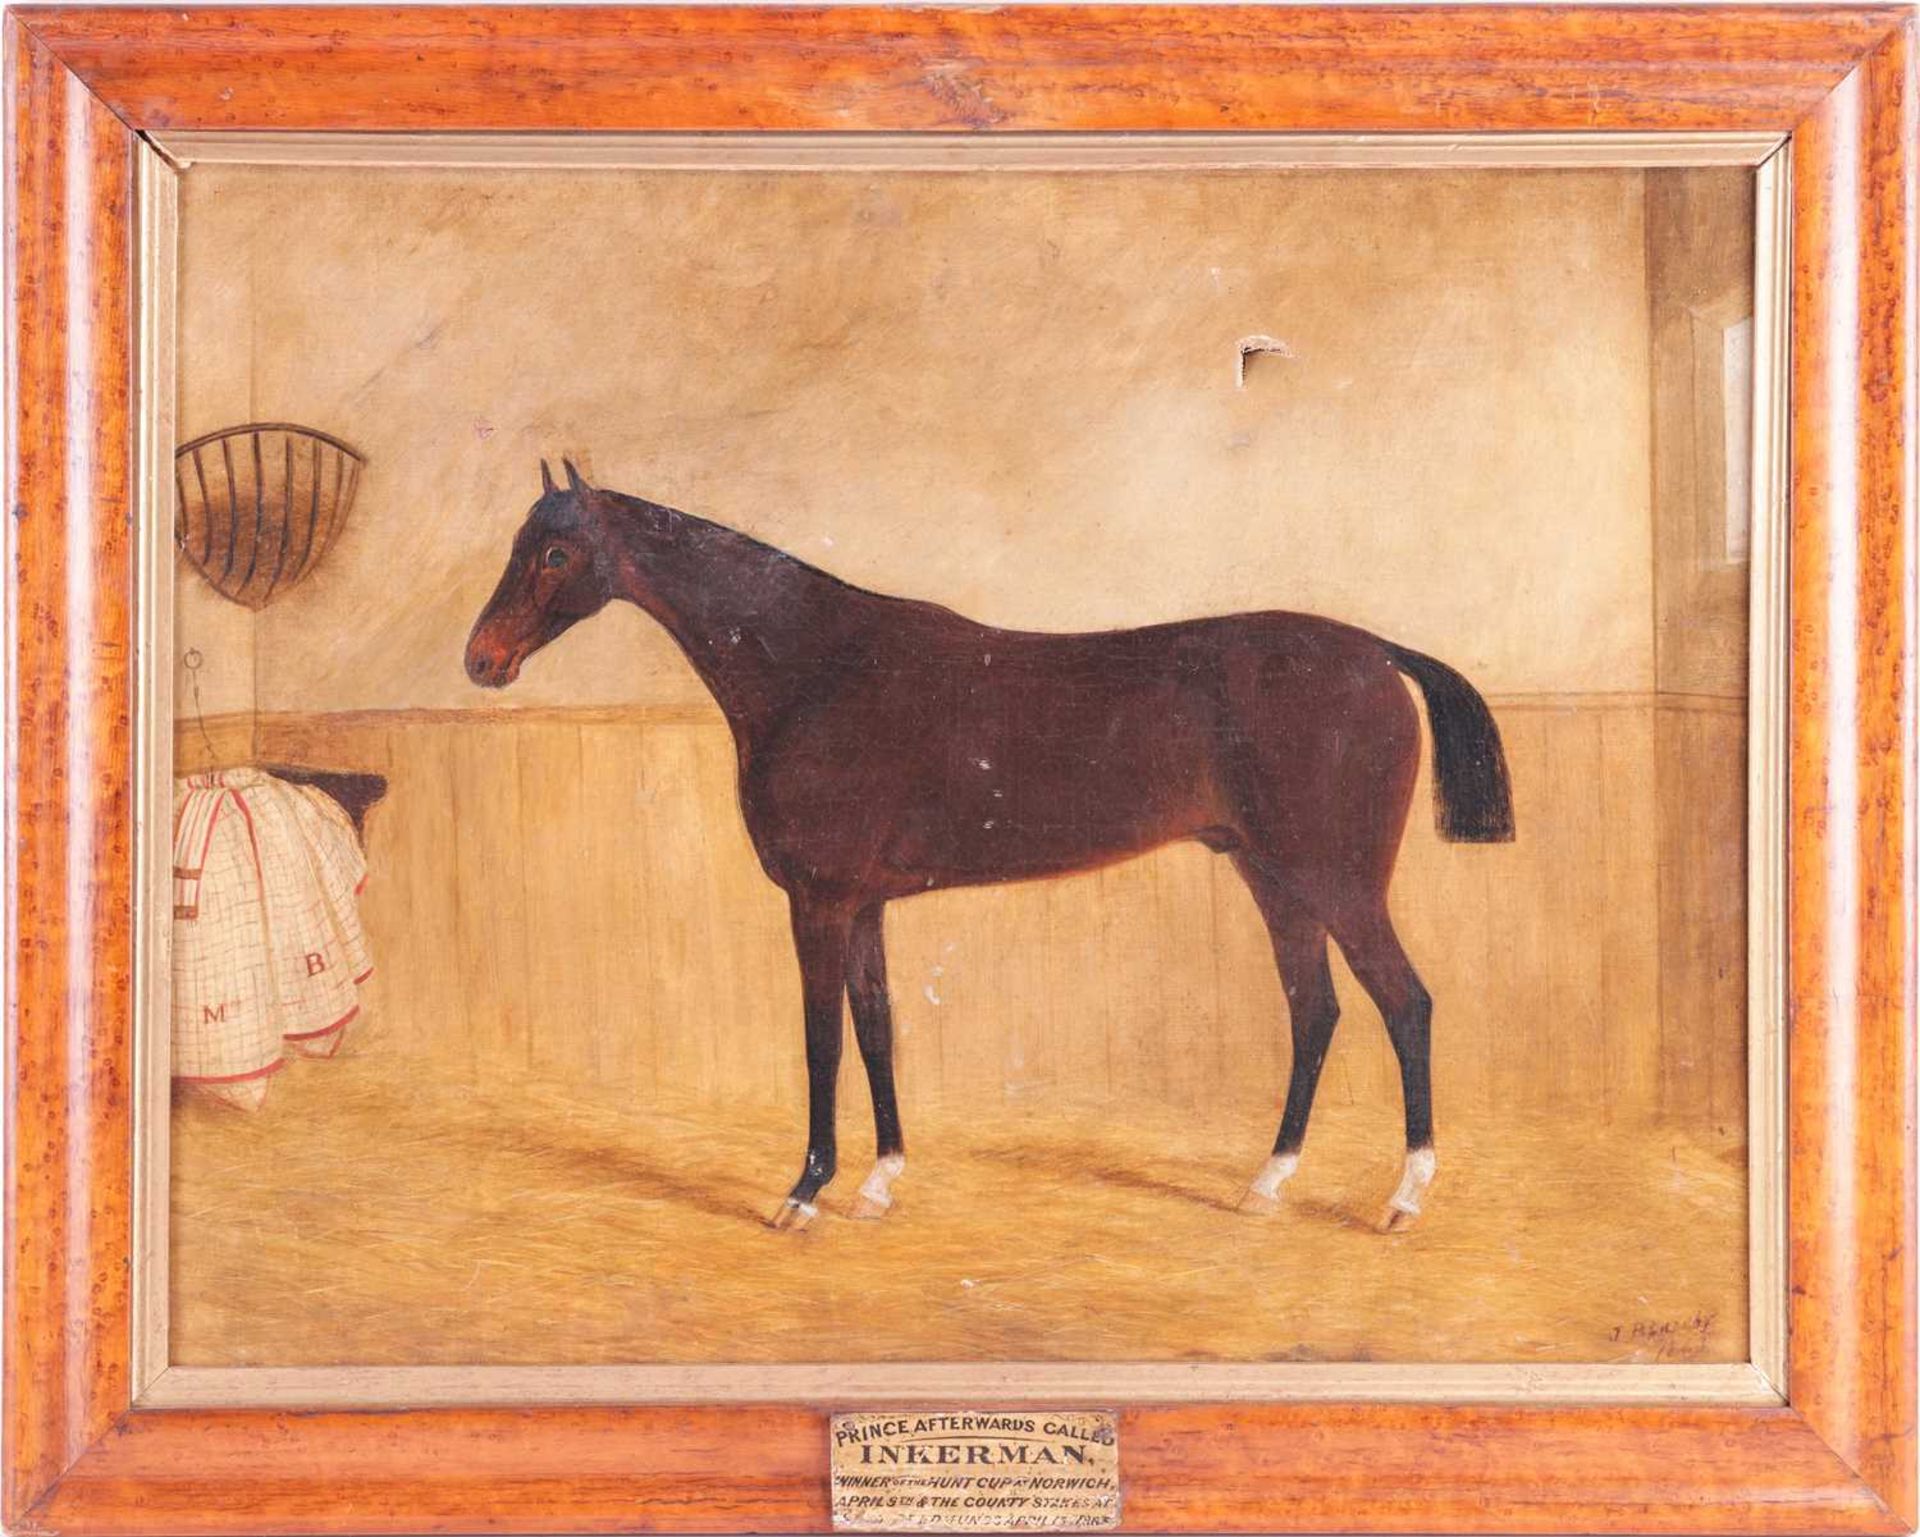 James Blazeby (19th century), Racehorse in stable - 'Prince afterwards called Inkerman, winner of th - Image 2 of 11